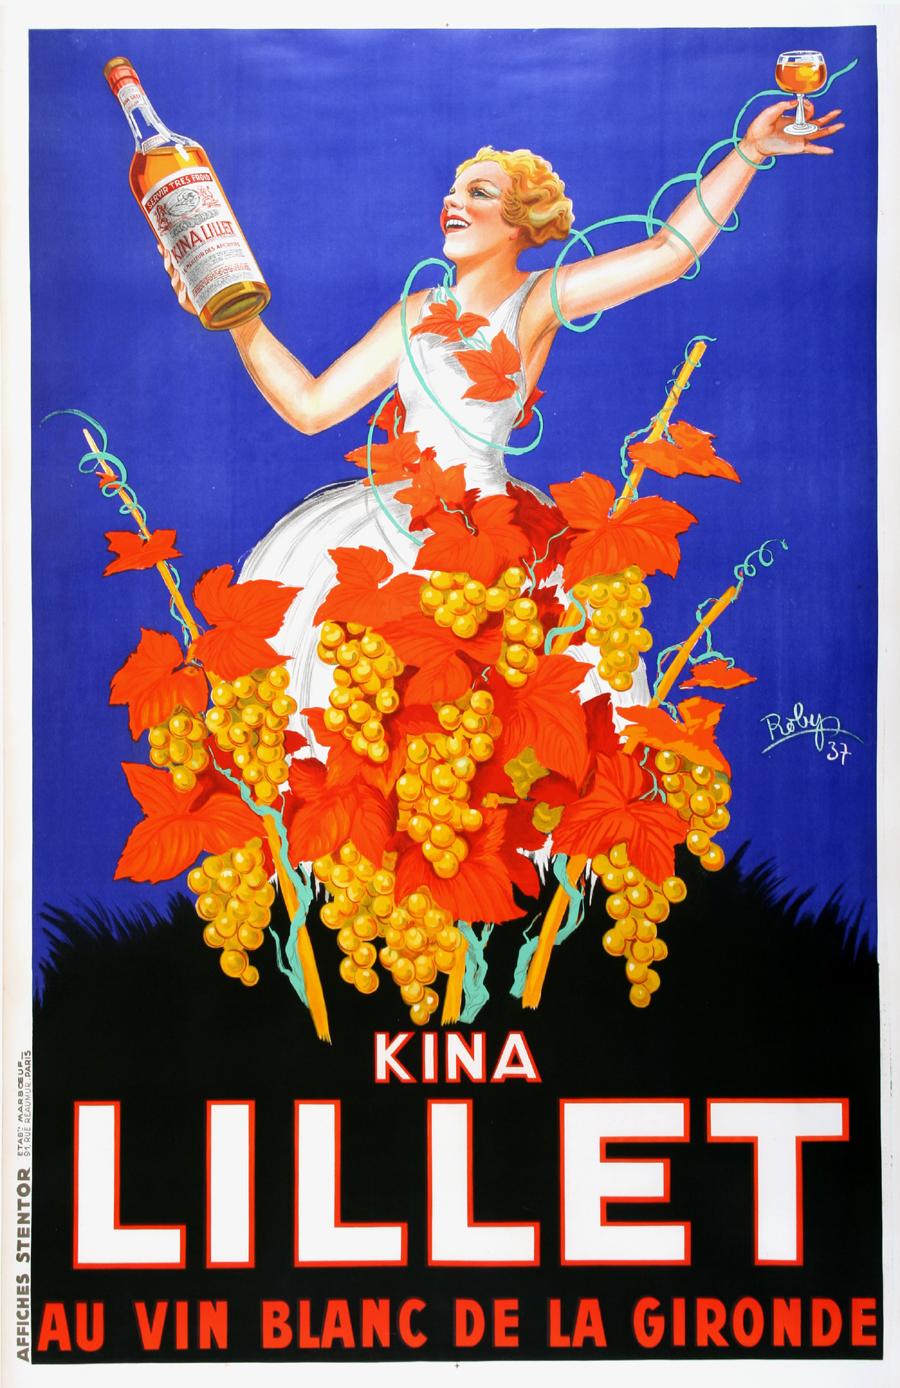 The artist of the poster, Robys, otherwise known as Robert Wolff, uses bright, contrasting colors and a dynamic composition to promote the exciting and celebratory Kina Lillet beverage. A beautiful woman, dressed in bountiful grapes and bright and